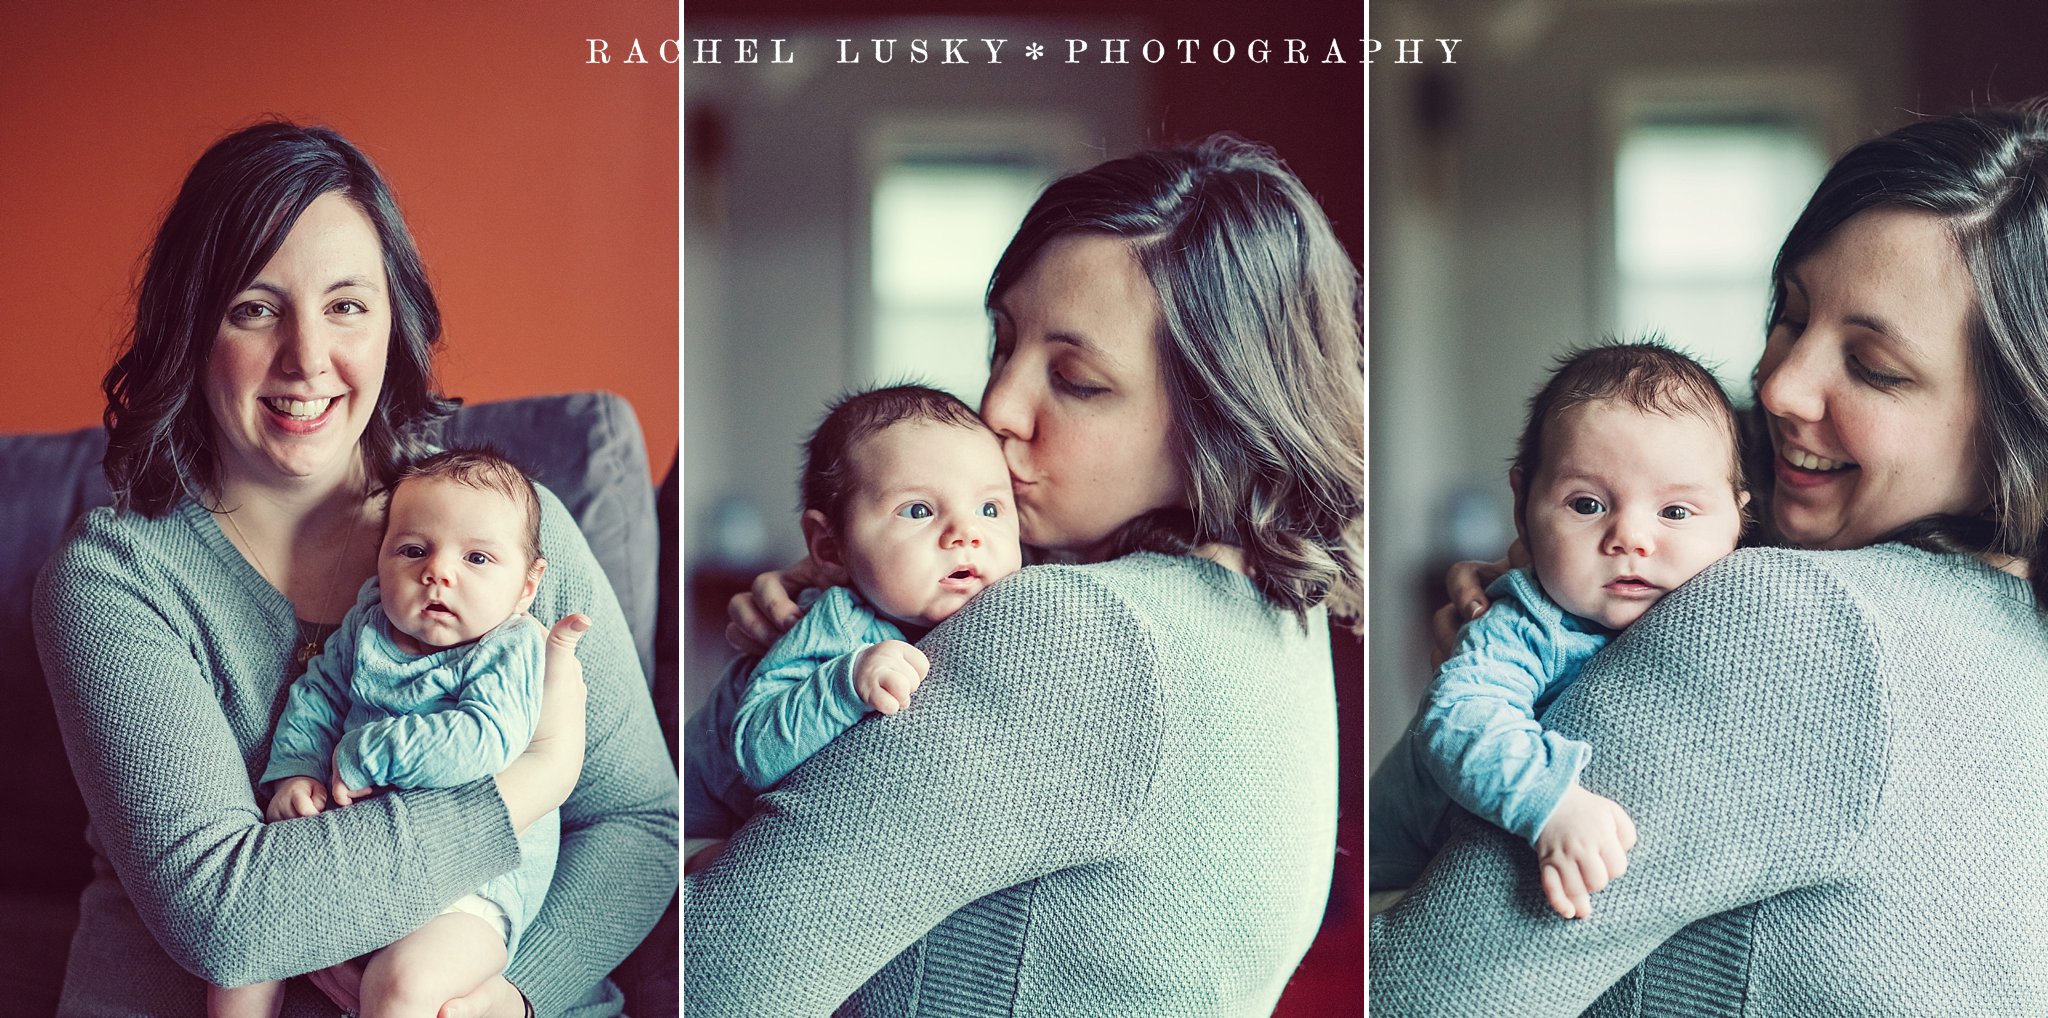 2 month old baby, Pittsburgh PA Photographer